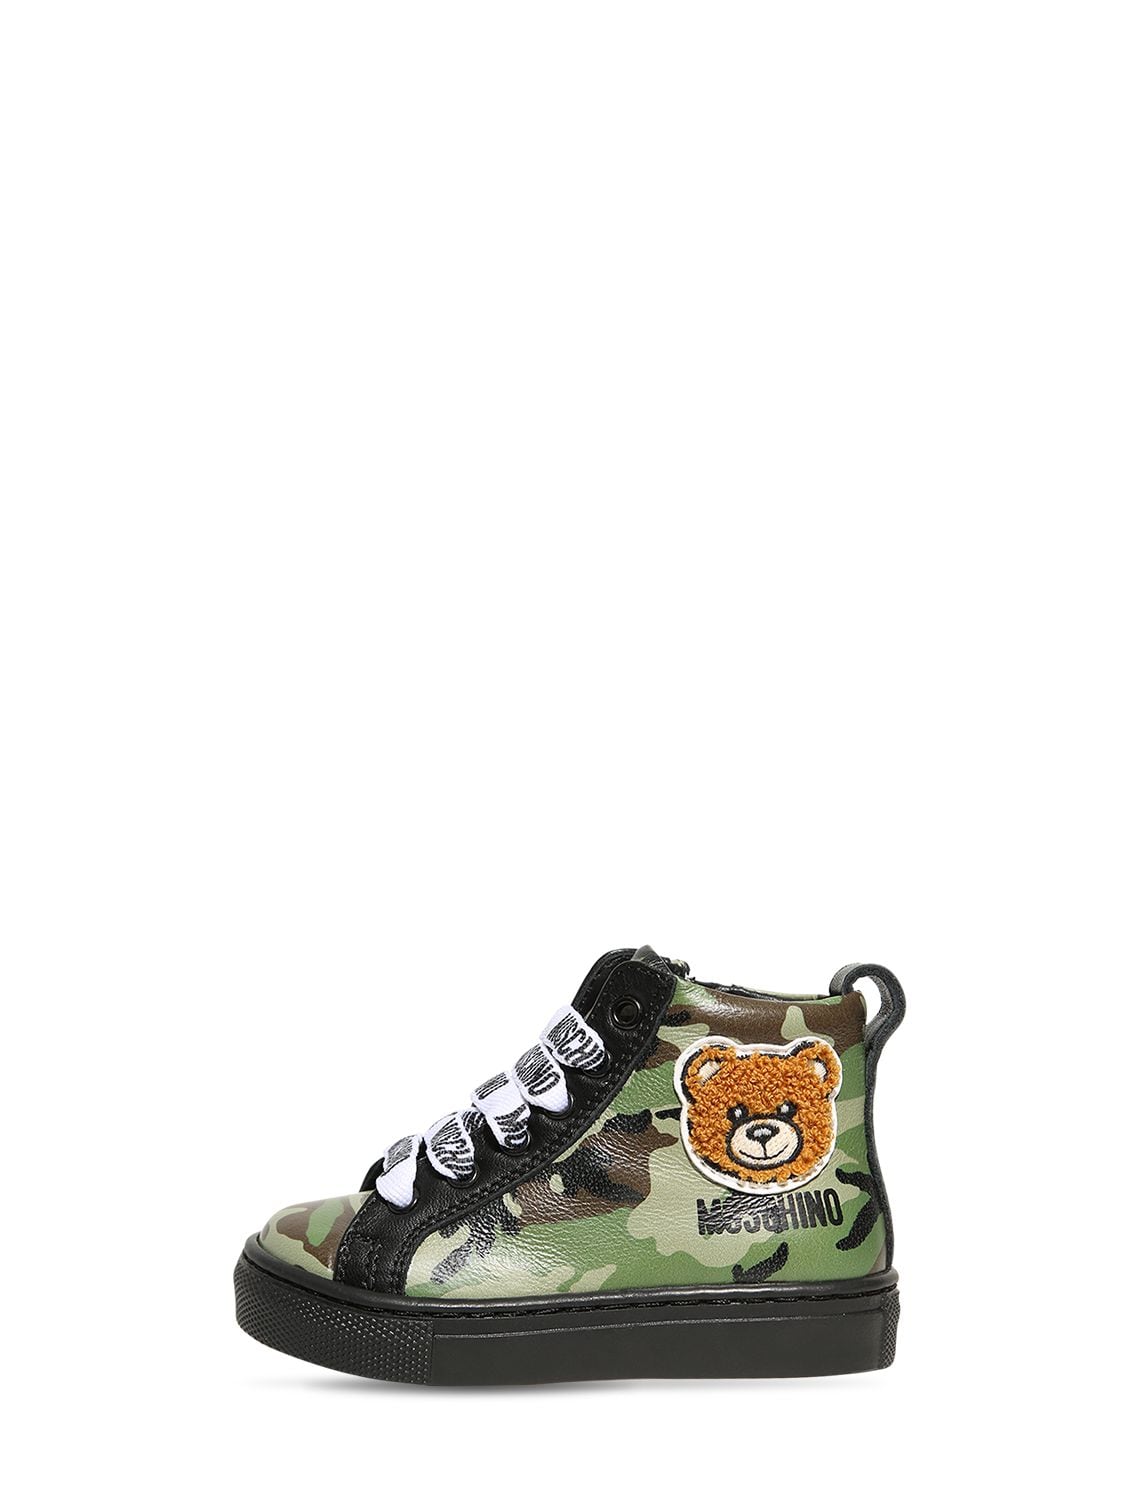 Moschino Kids' Camouflage Leather High Sneakers In Military Green